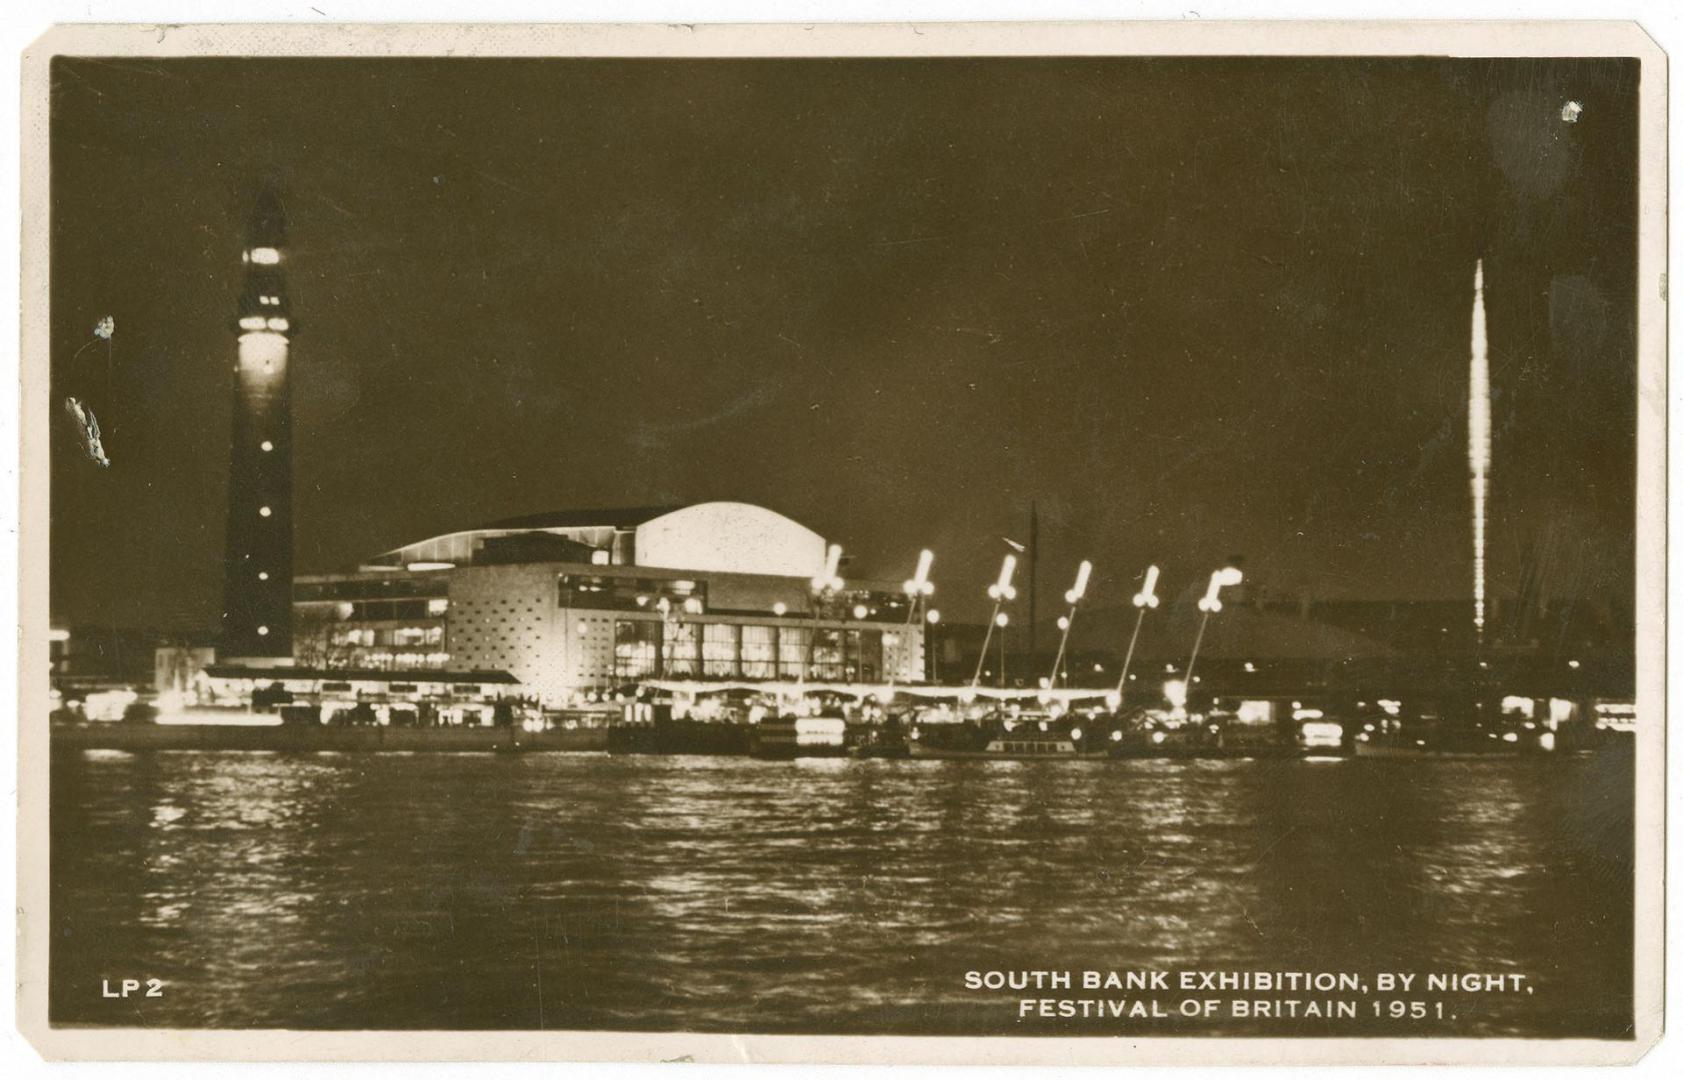 South Bank Exhibition, by night, Festival of Britain 1951